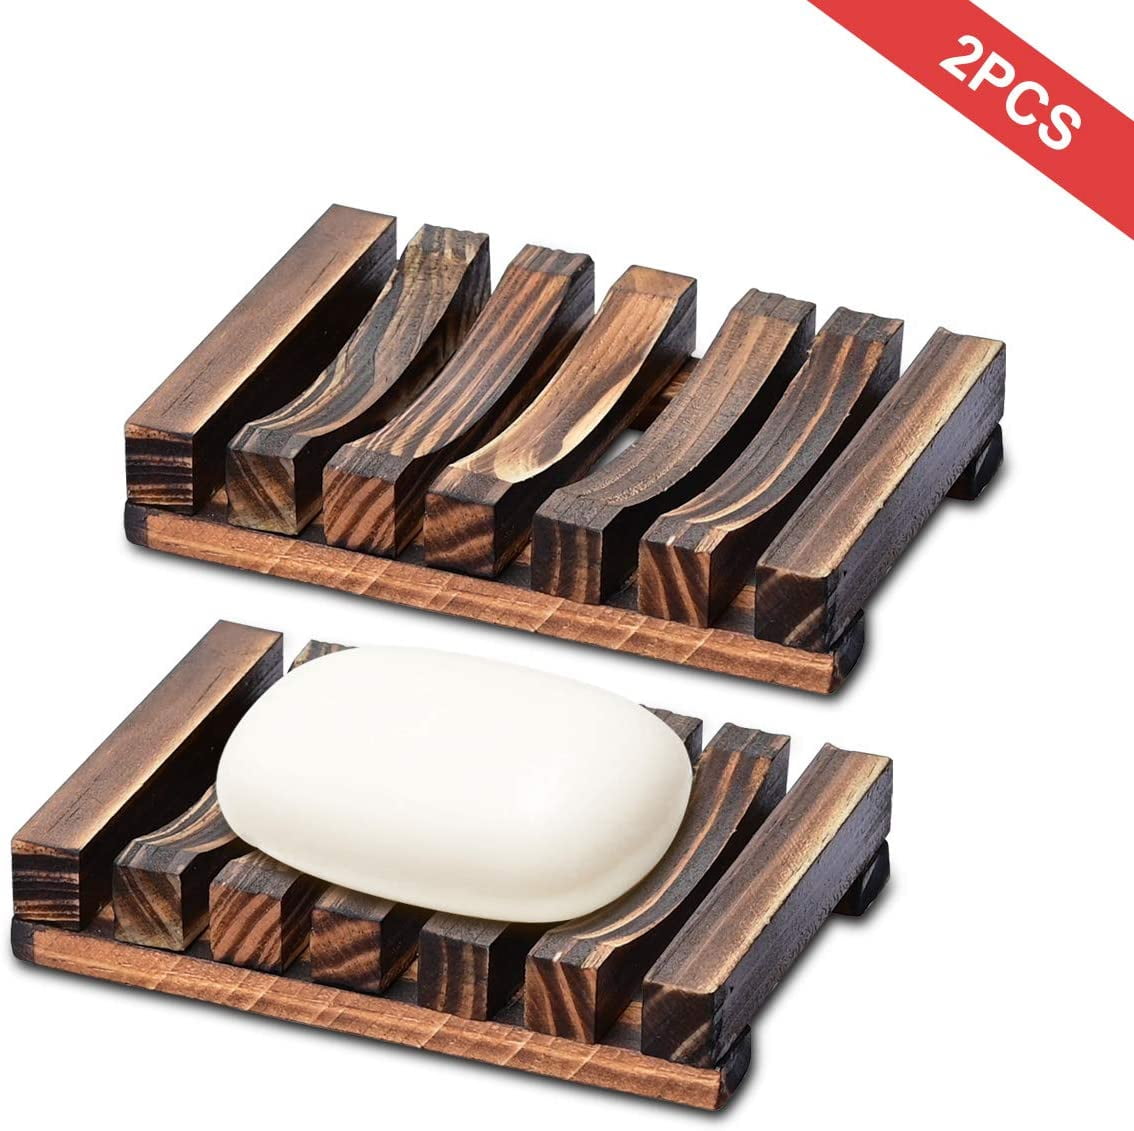 10PCS Wooden Bamboo Soap Holder Dish Bathroom Shower Plates/Stand Rack Home Tray 